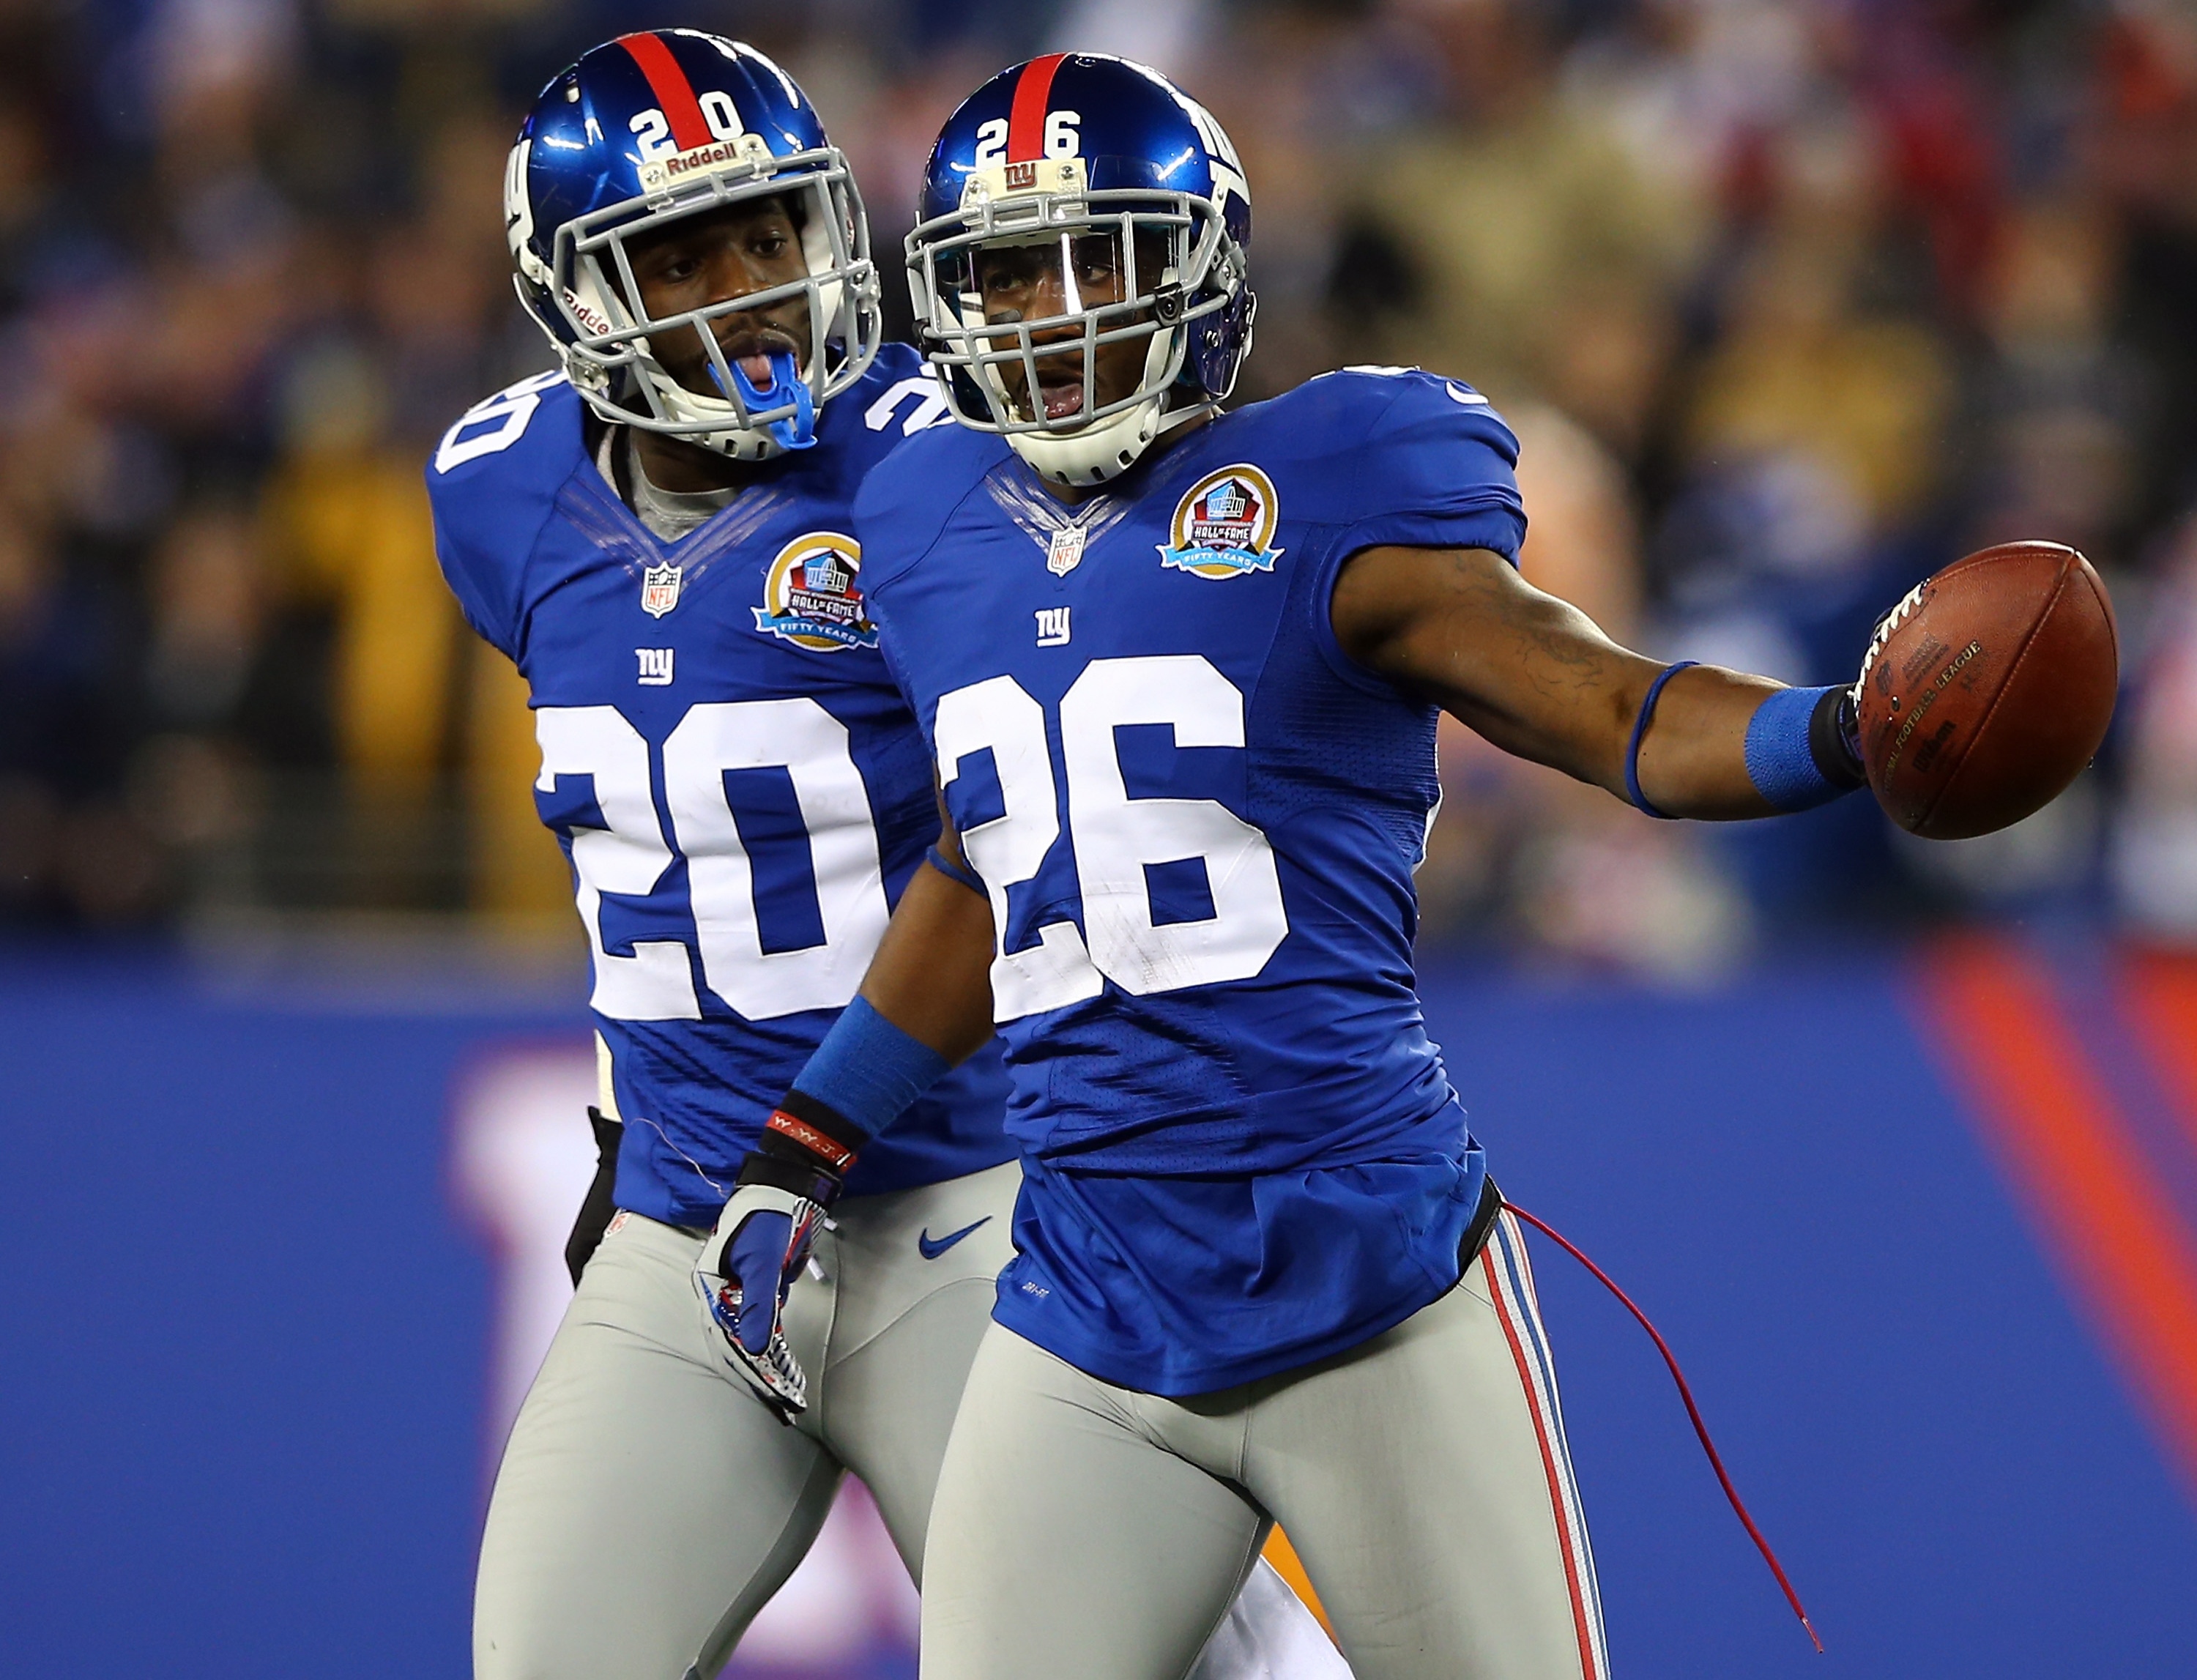 Antrel Rolle (26) and Prince Amukamara. (Getty)